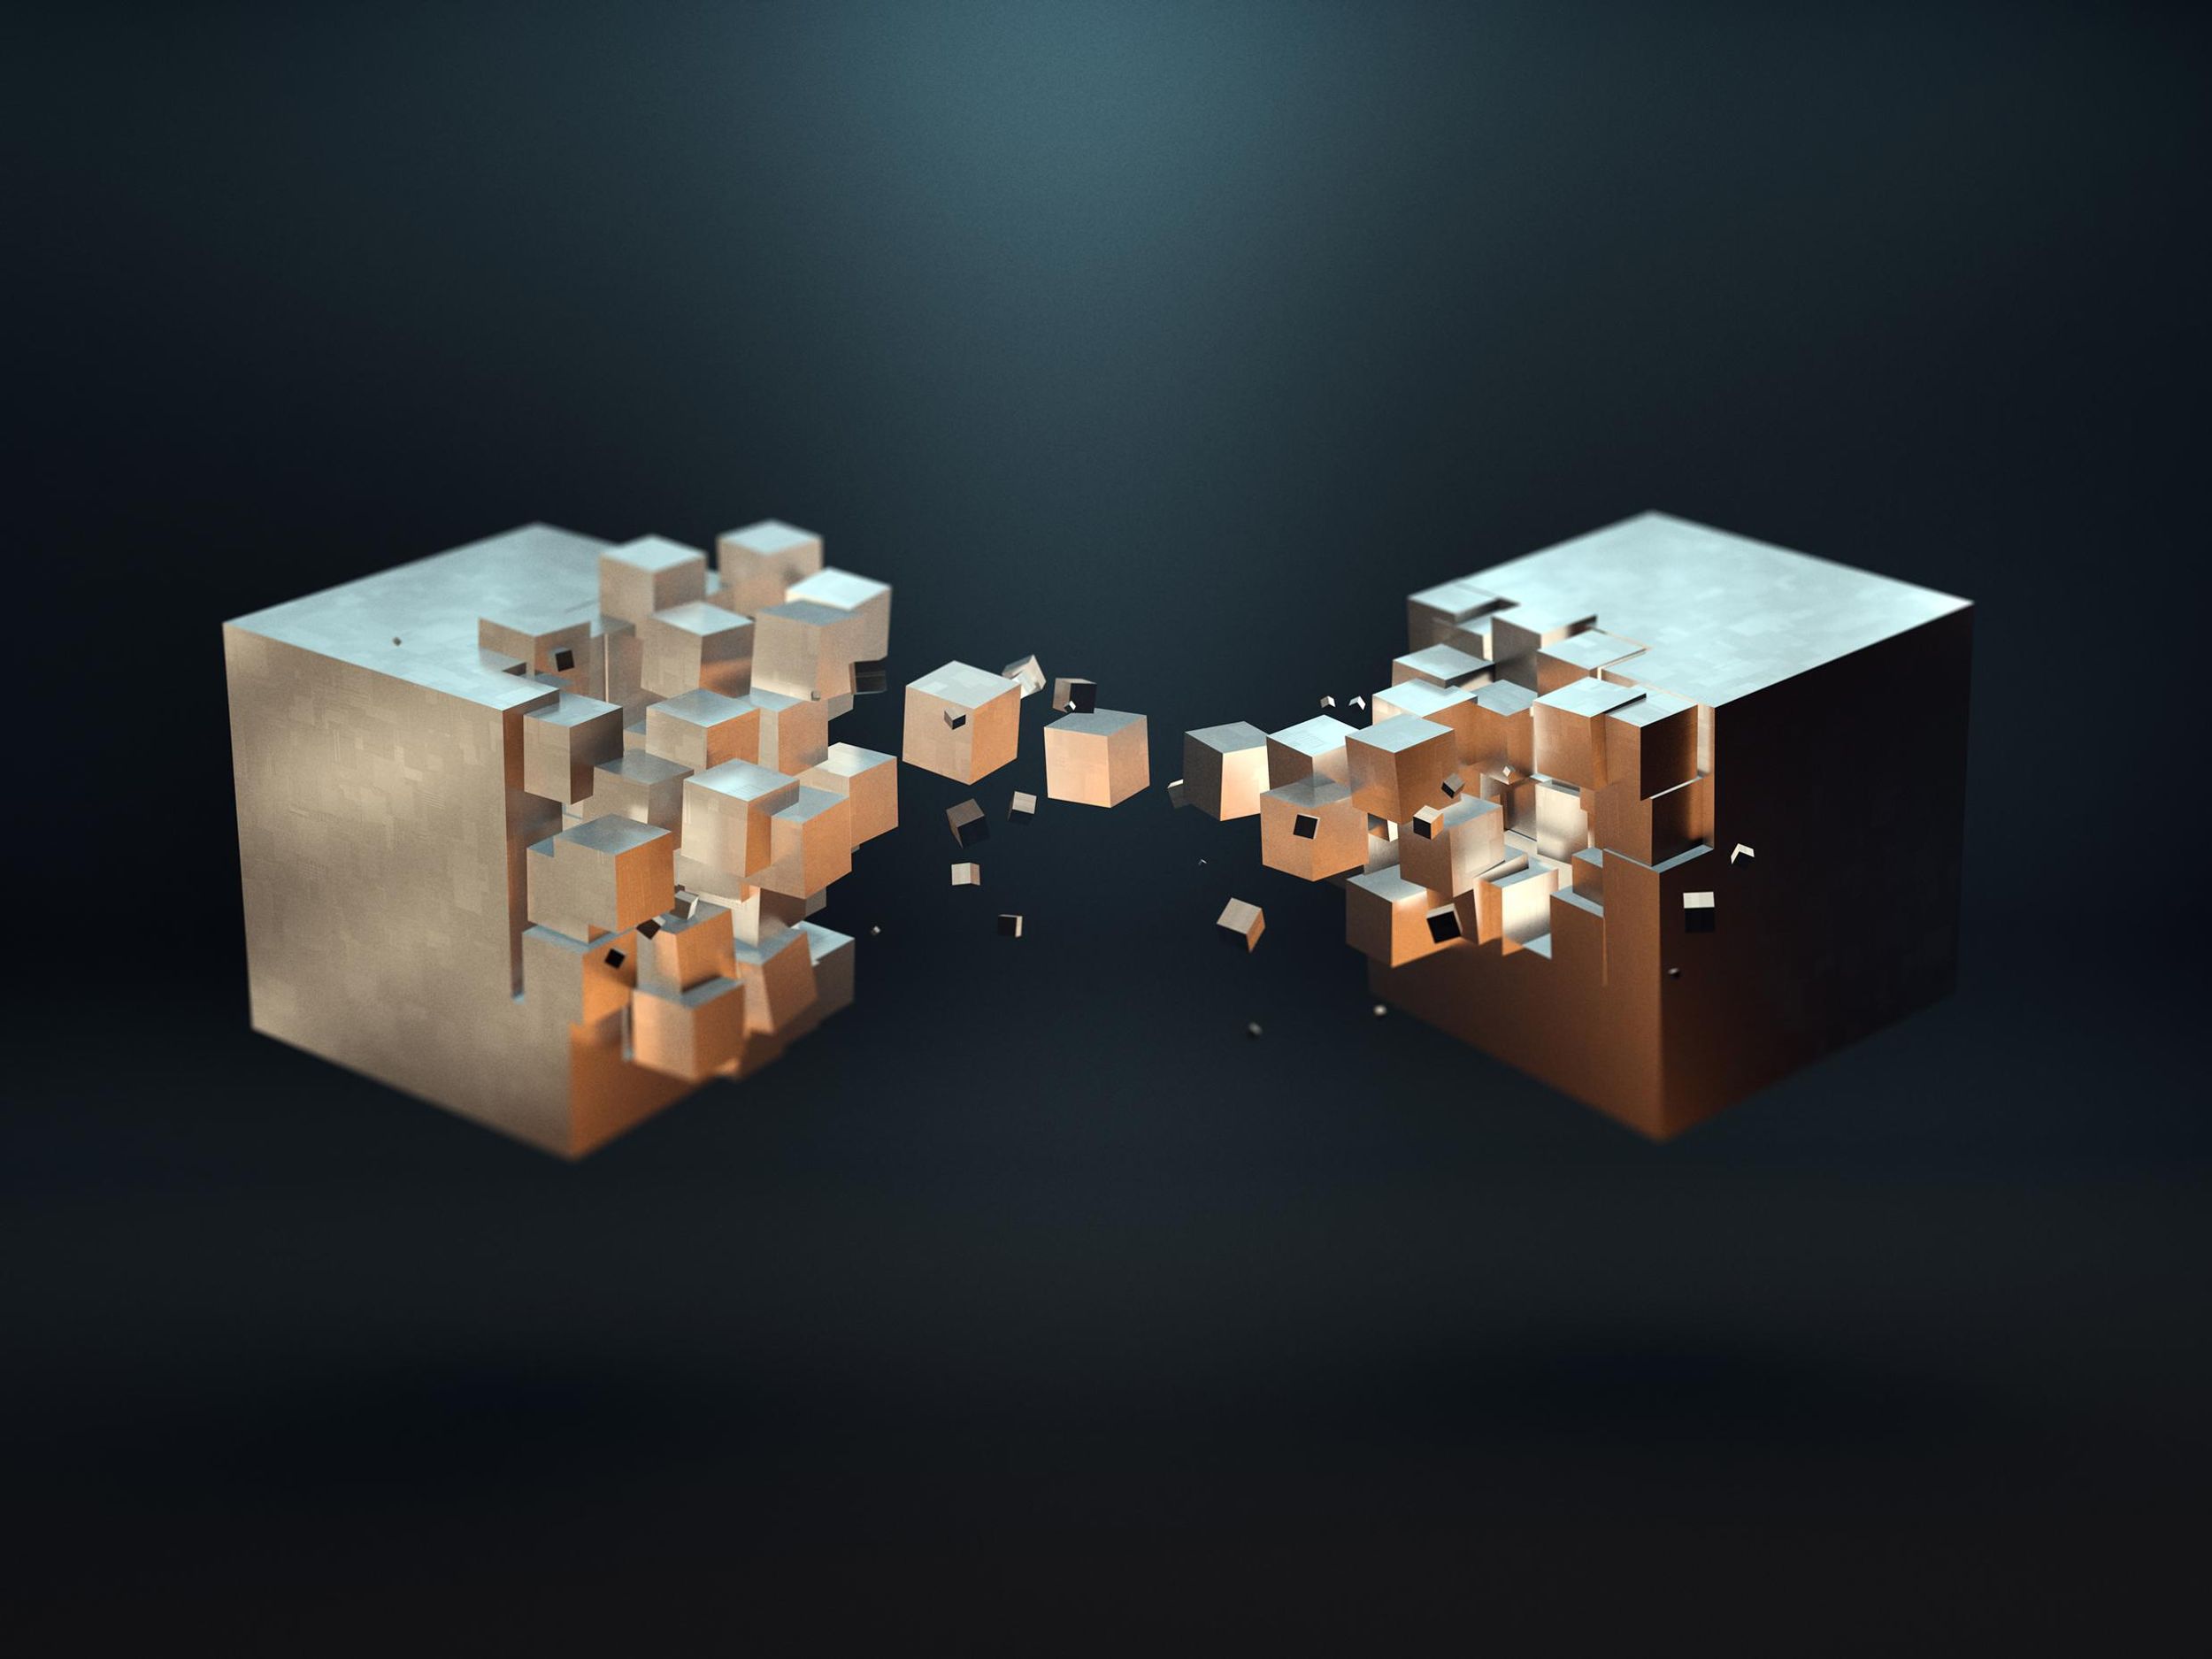 An artists impression of two blockchain blocks trying to communicate with each other.